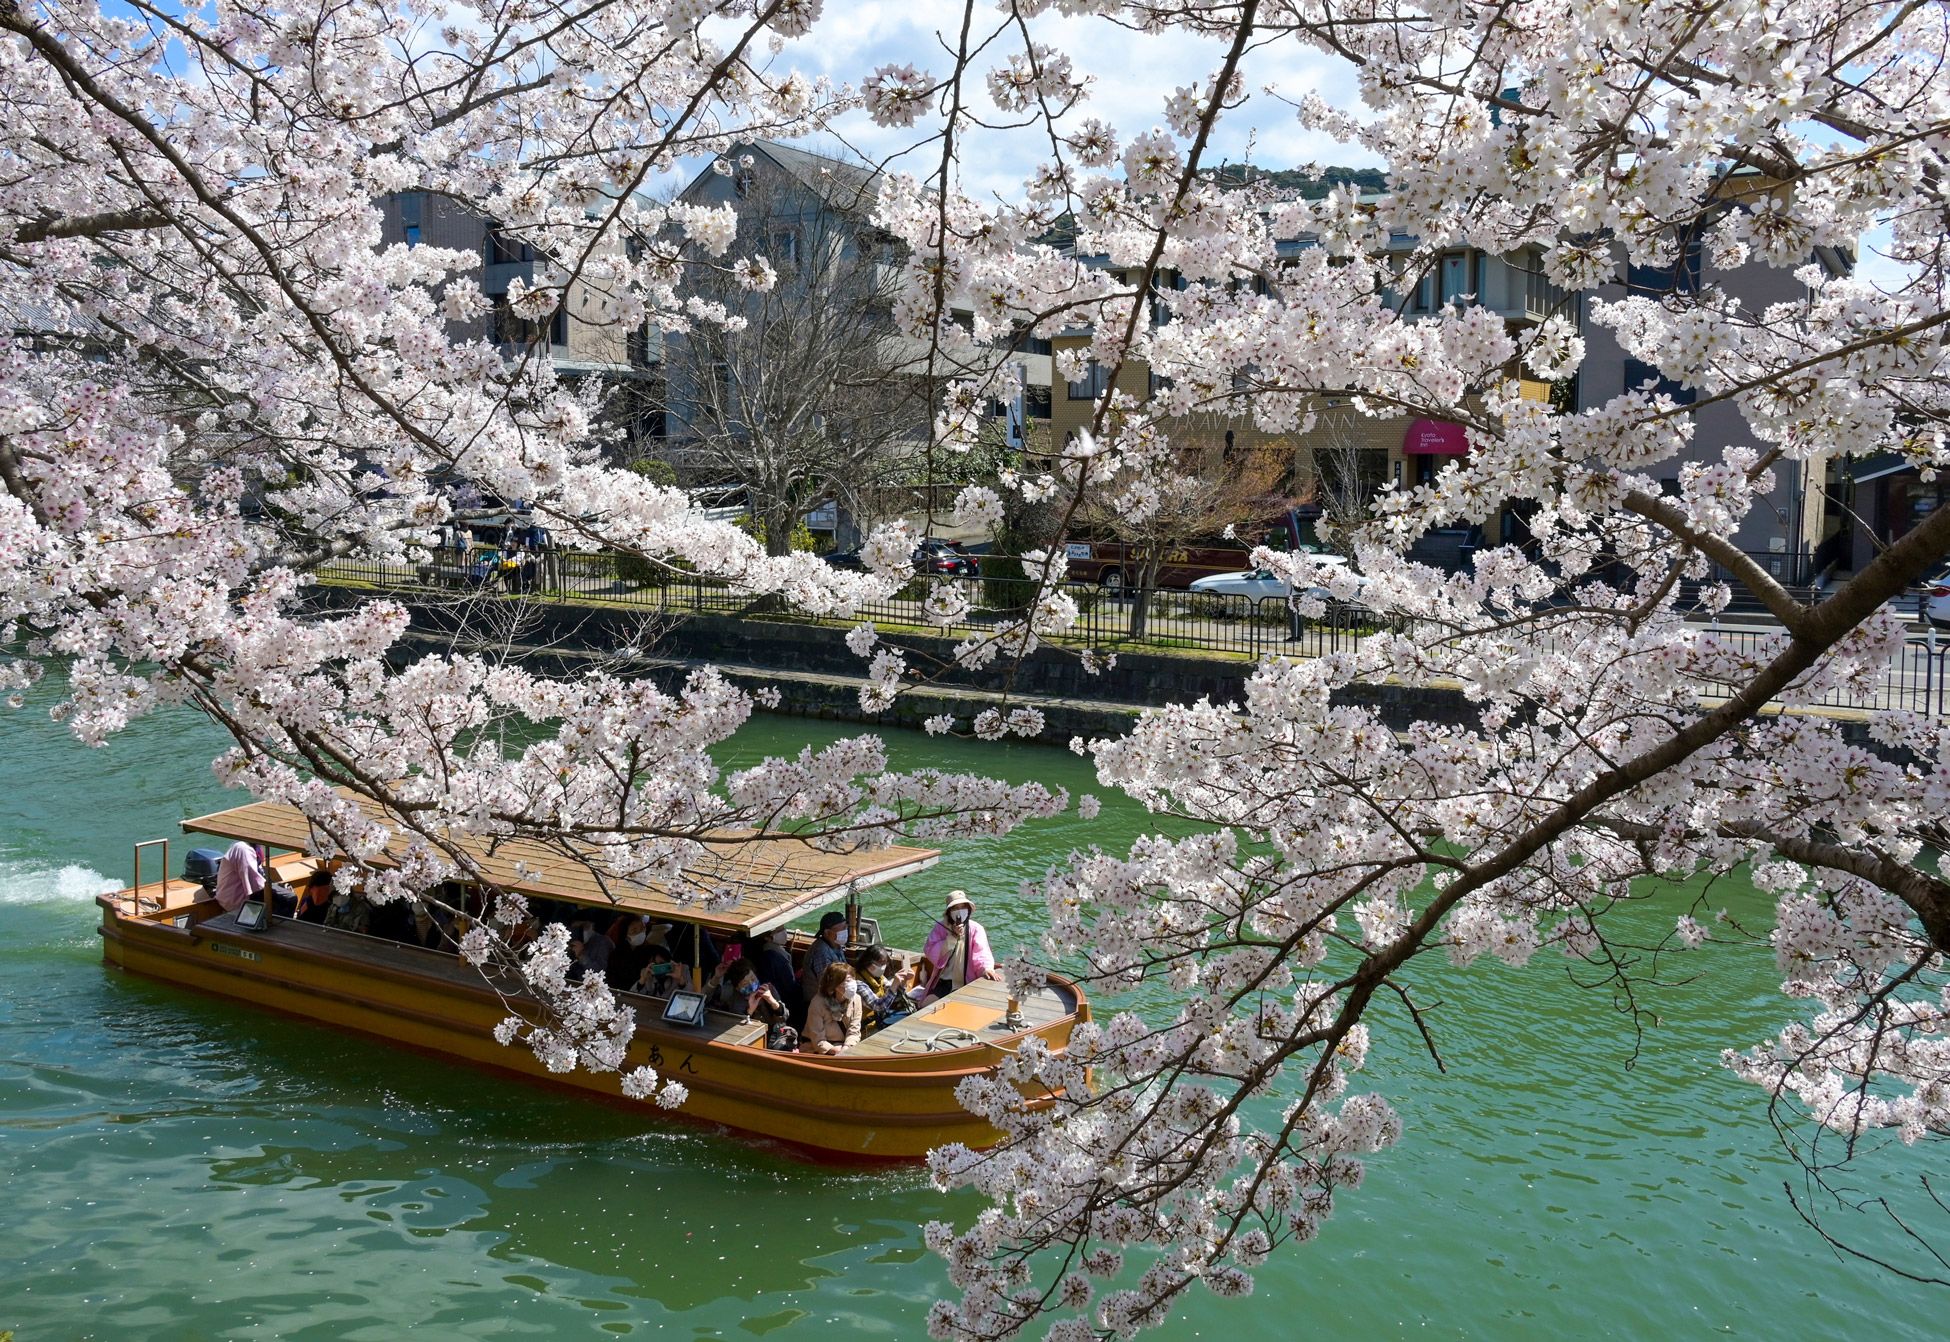 Human-induced climate crisis is making Japan's cherry blossoms bloom earlier